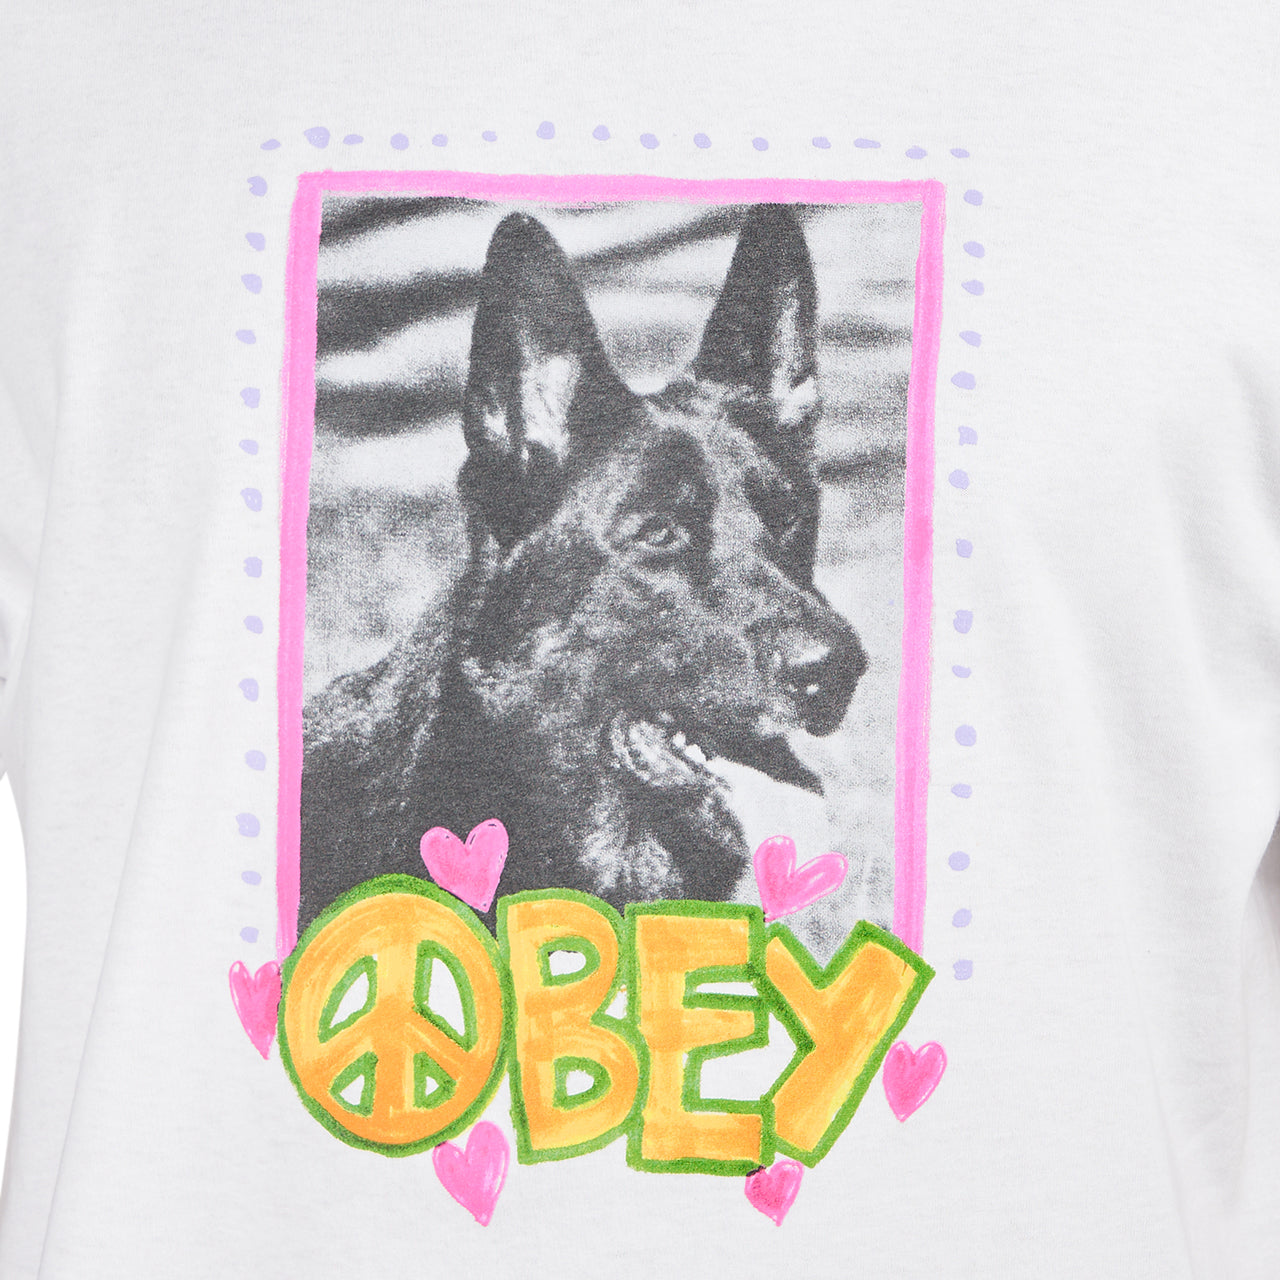 Obey Peace Dog Classic T-Shirt (Weiß)  - Allike Store